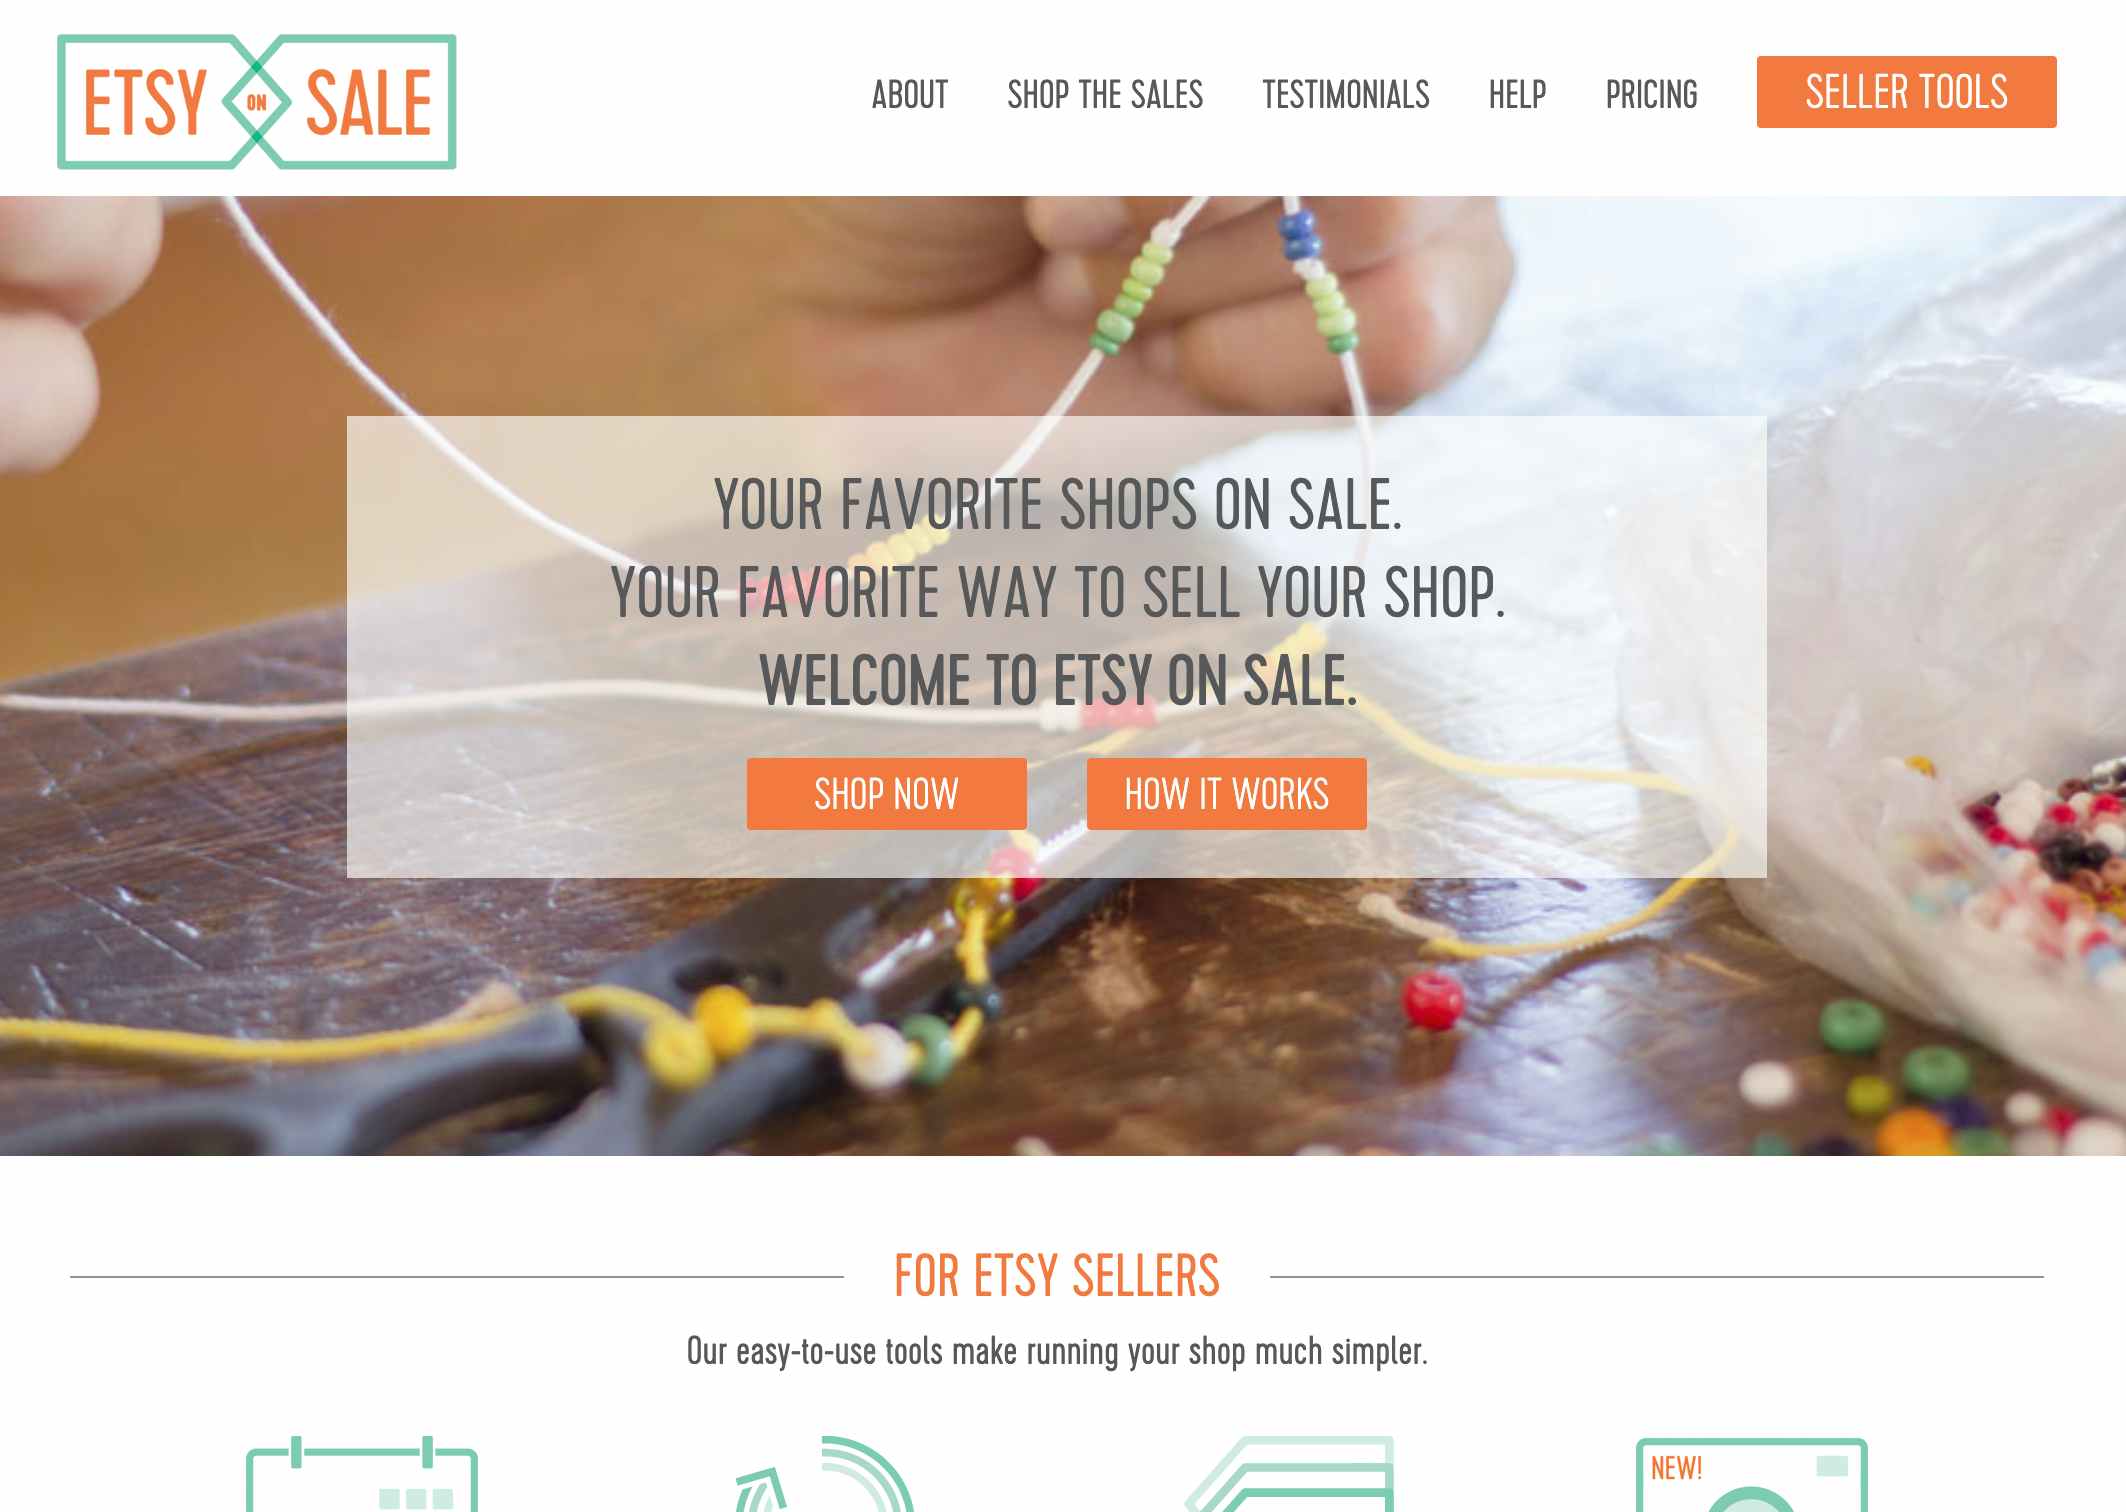 A screenshot of the Etsy on Sale website.